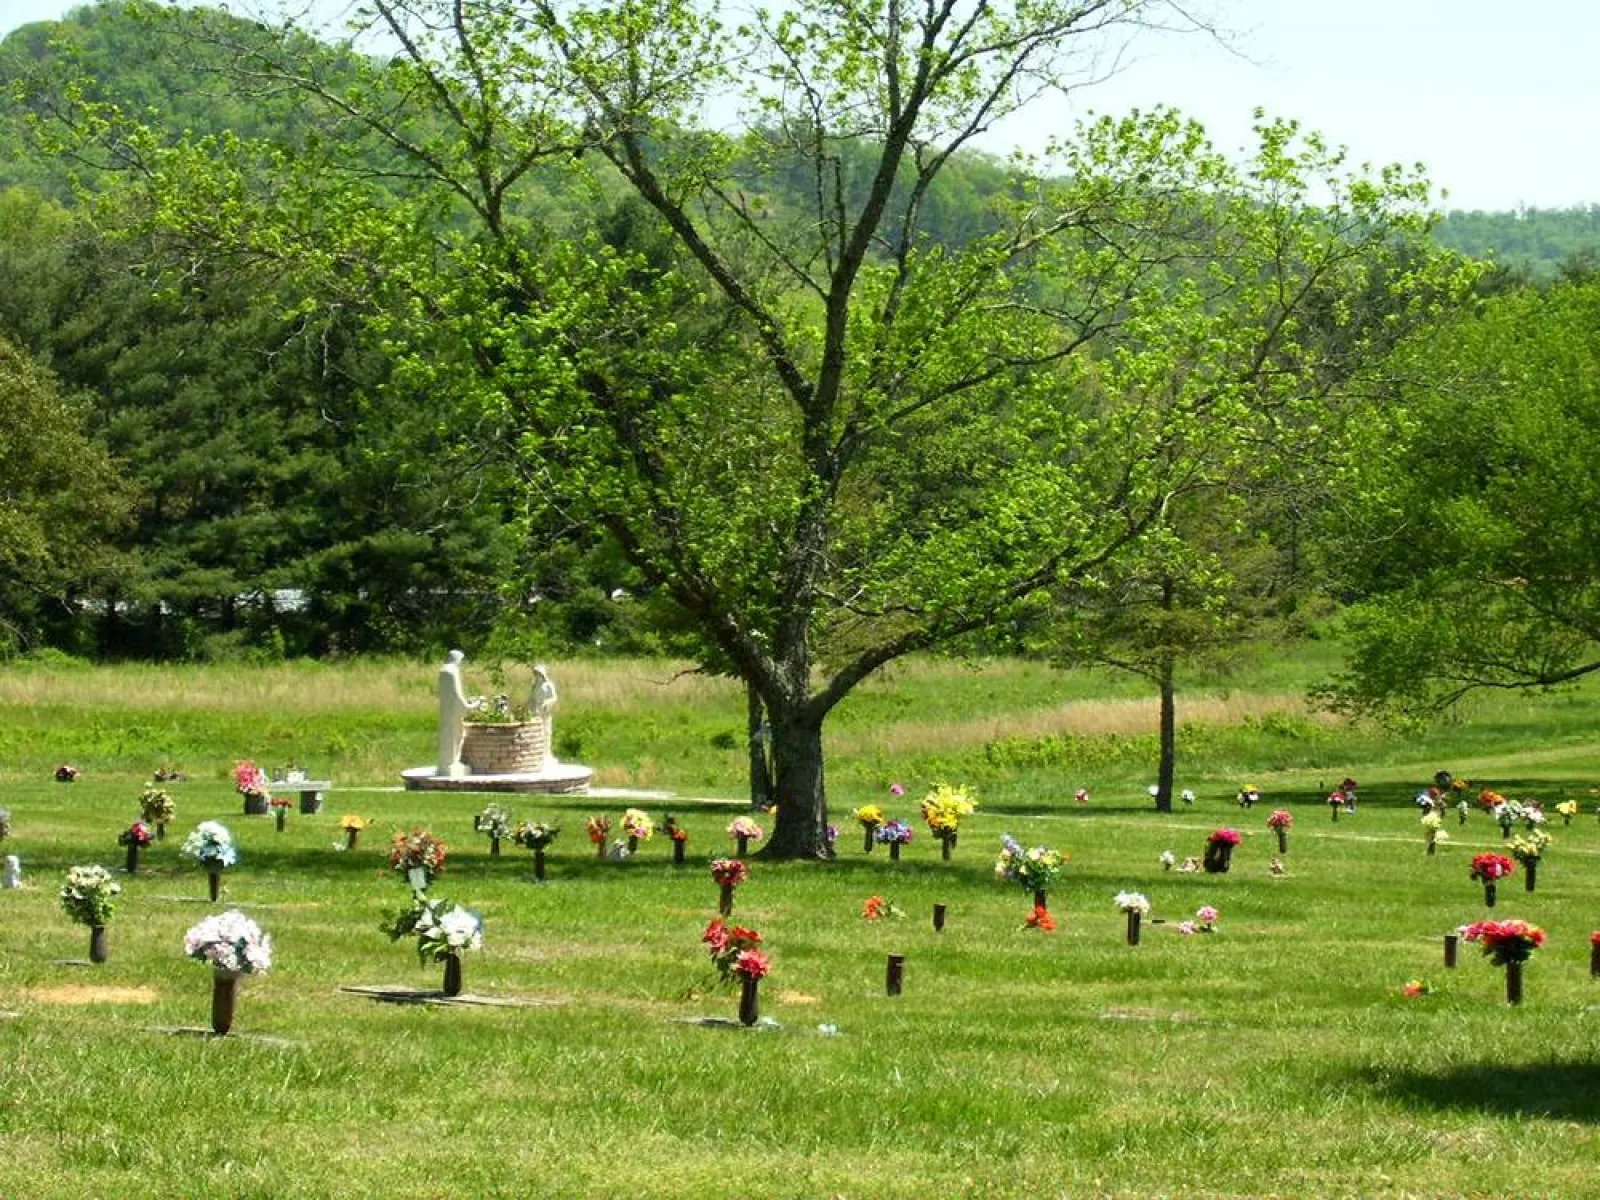 a group of people standing on a lush green field